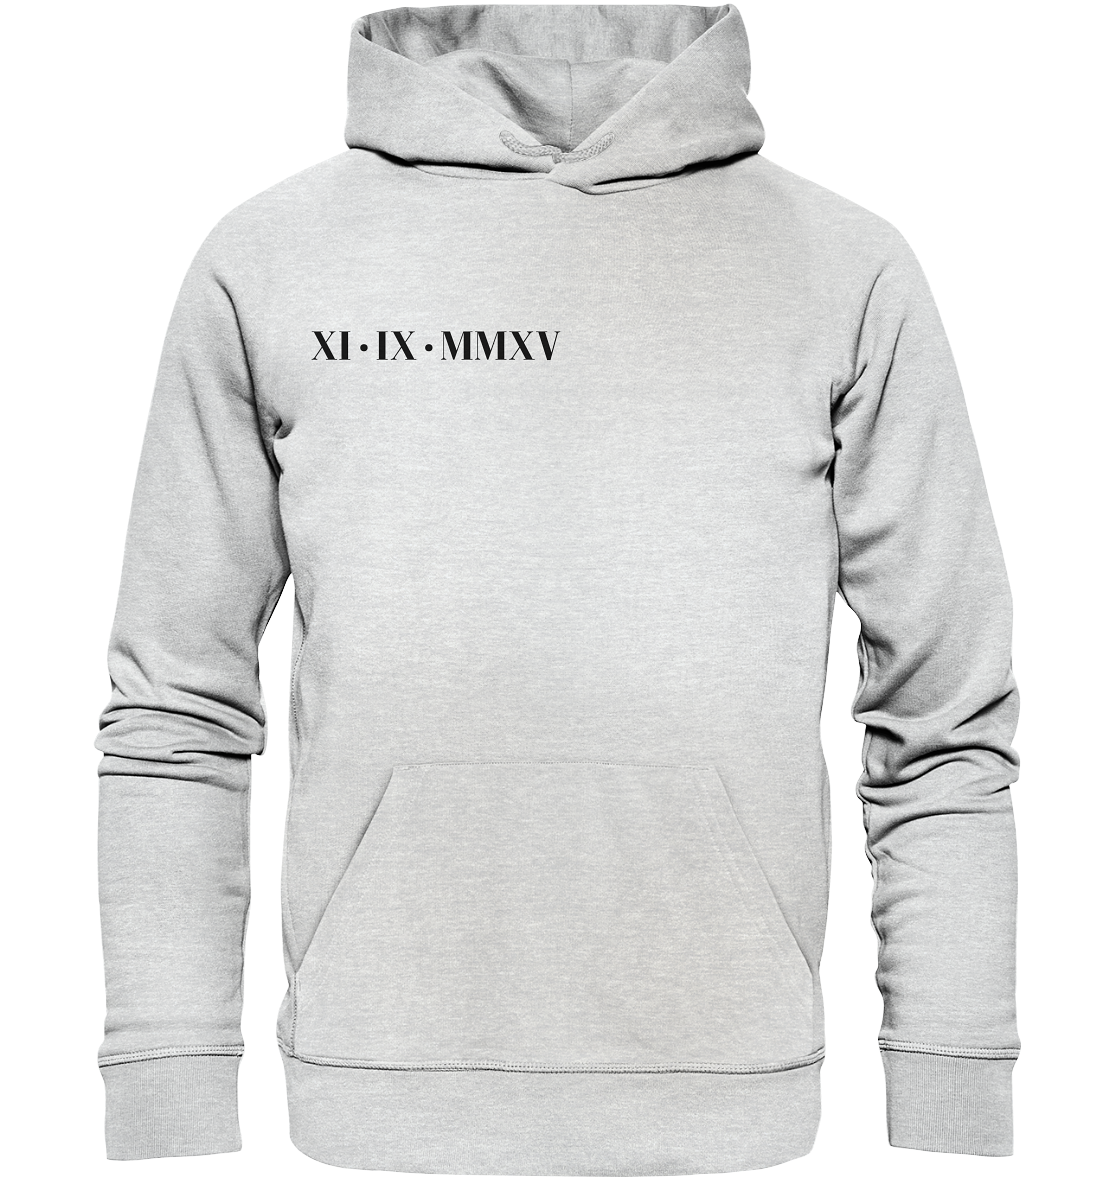 Hoddie with Roman wedding date/date of getting to know each other - Premium unisex hoodie